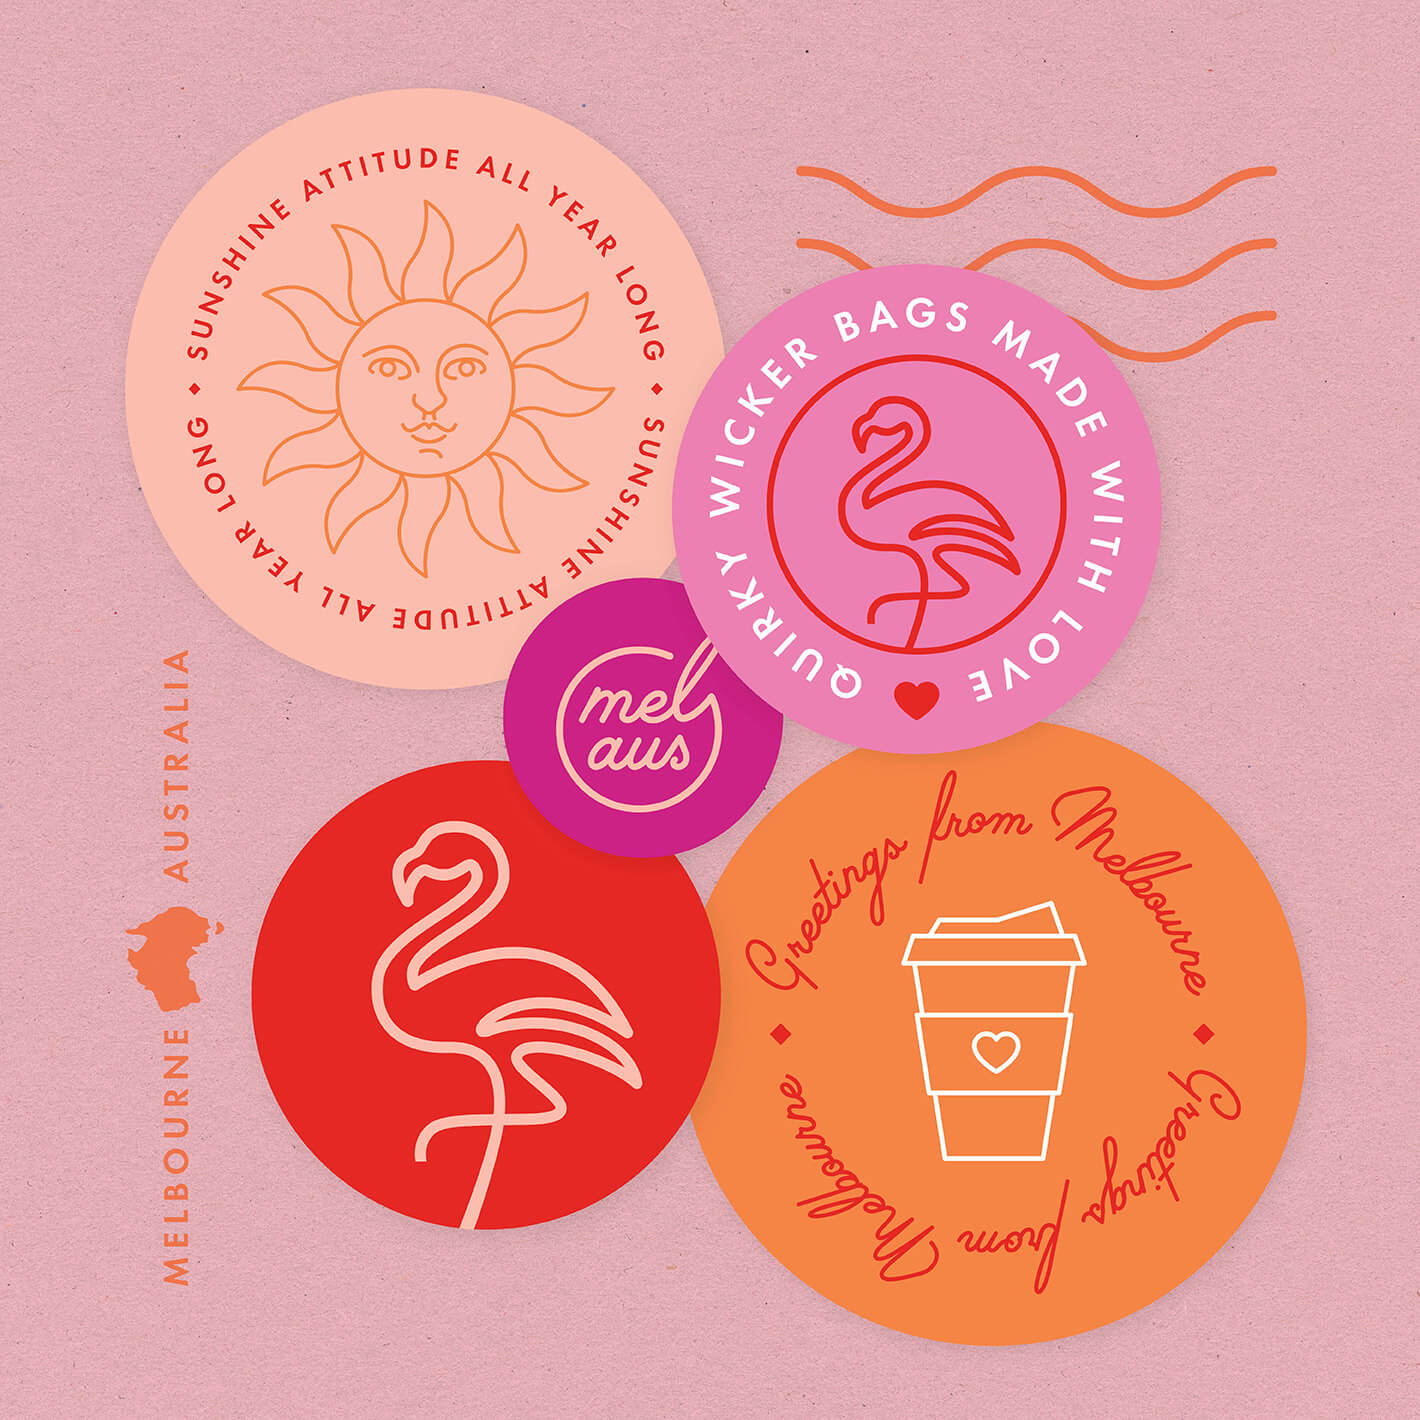 Image of branded stickers for use on sending orders. They are bright pinks and oranges and are in a vintage stamp style